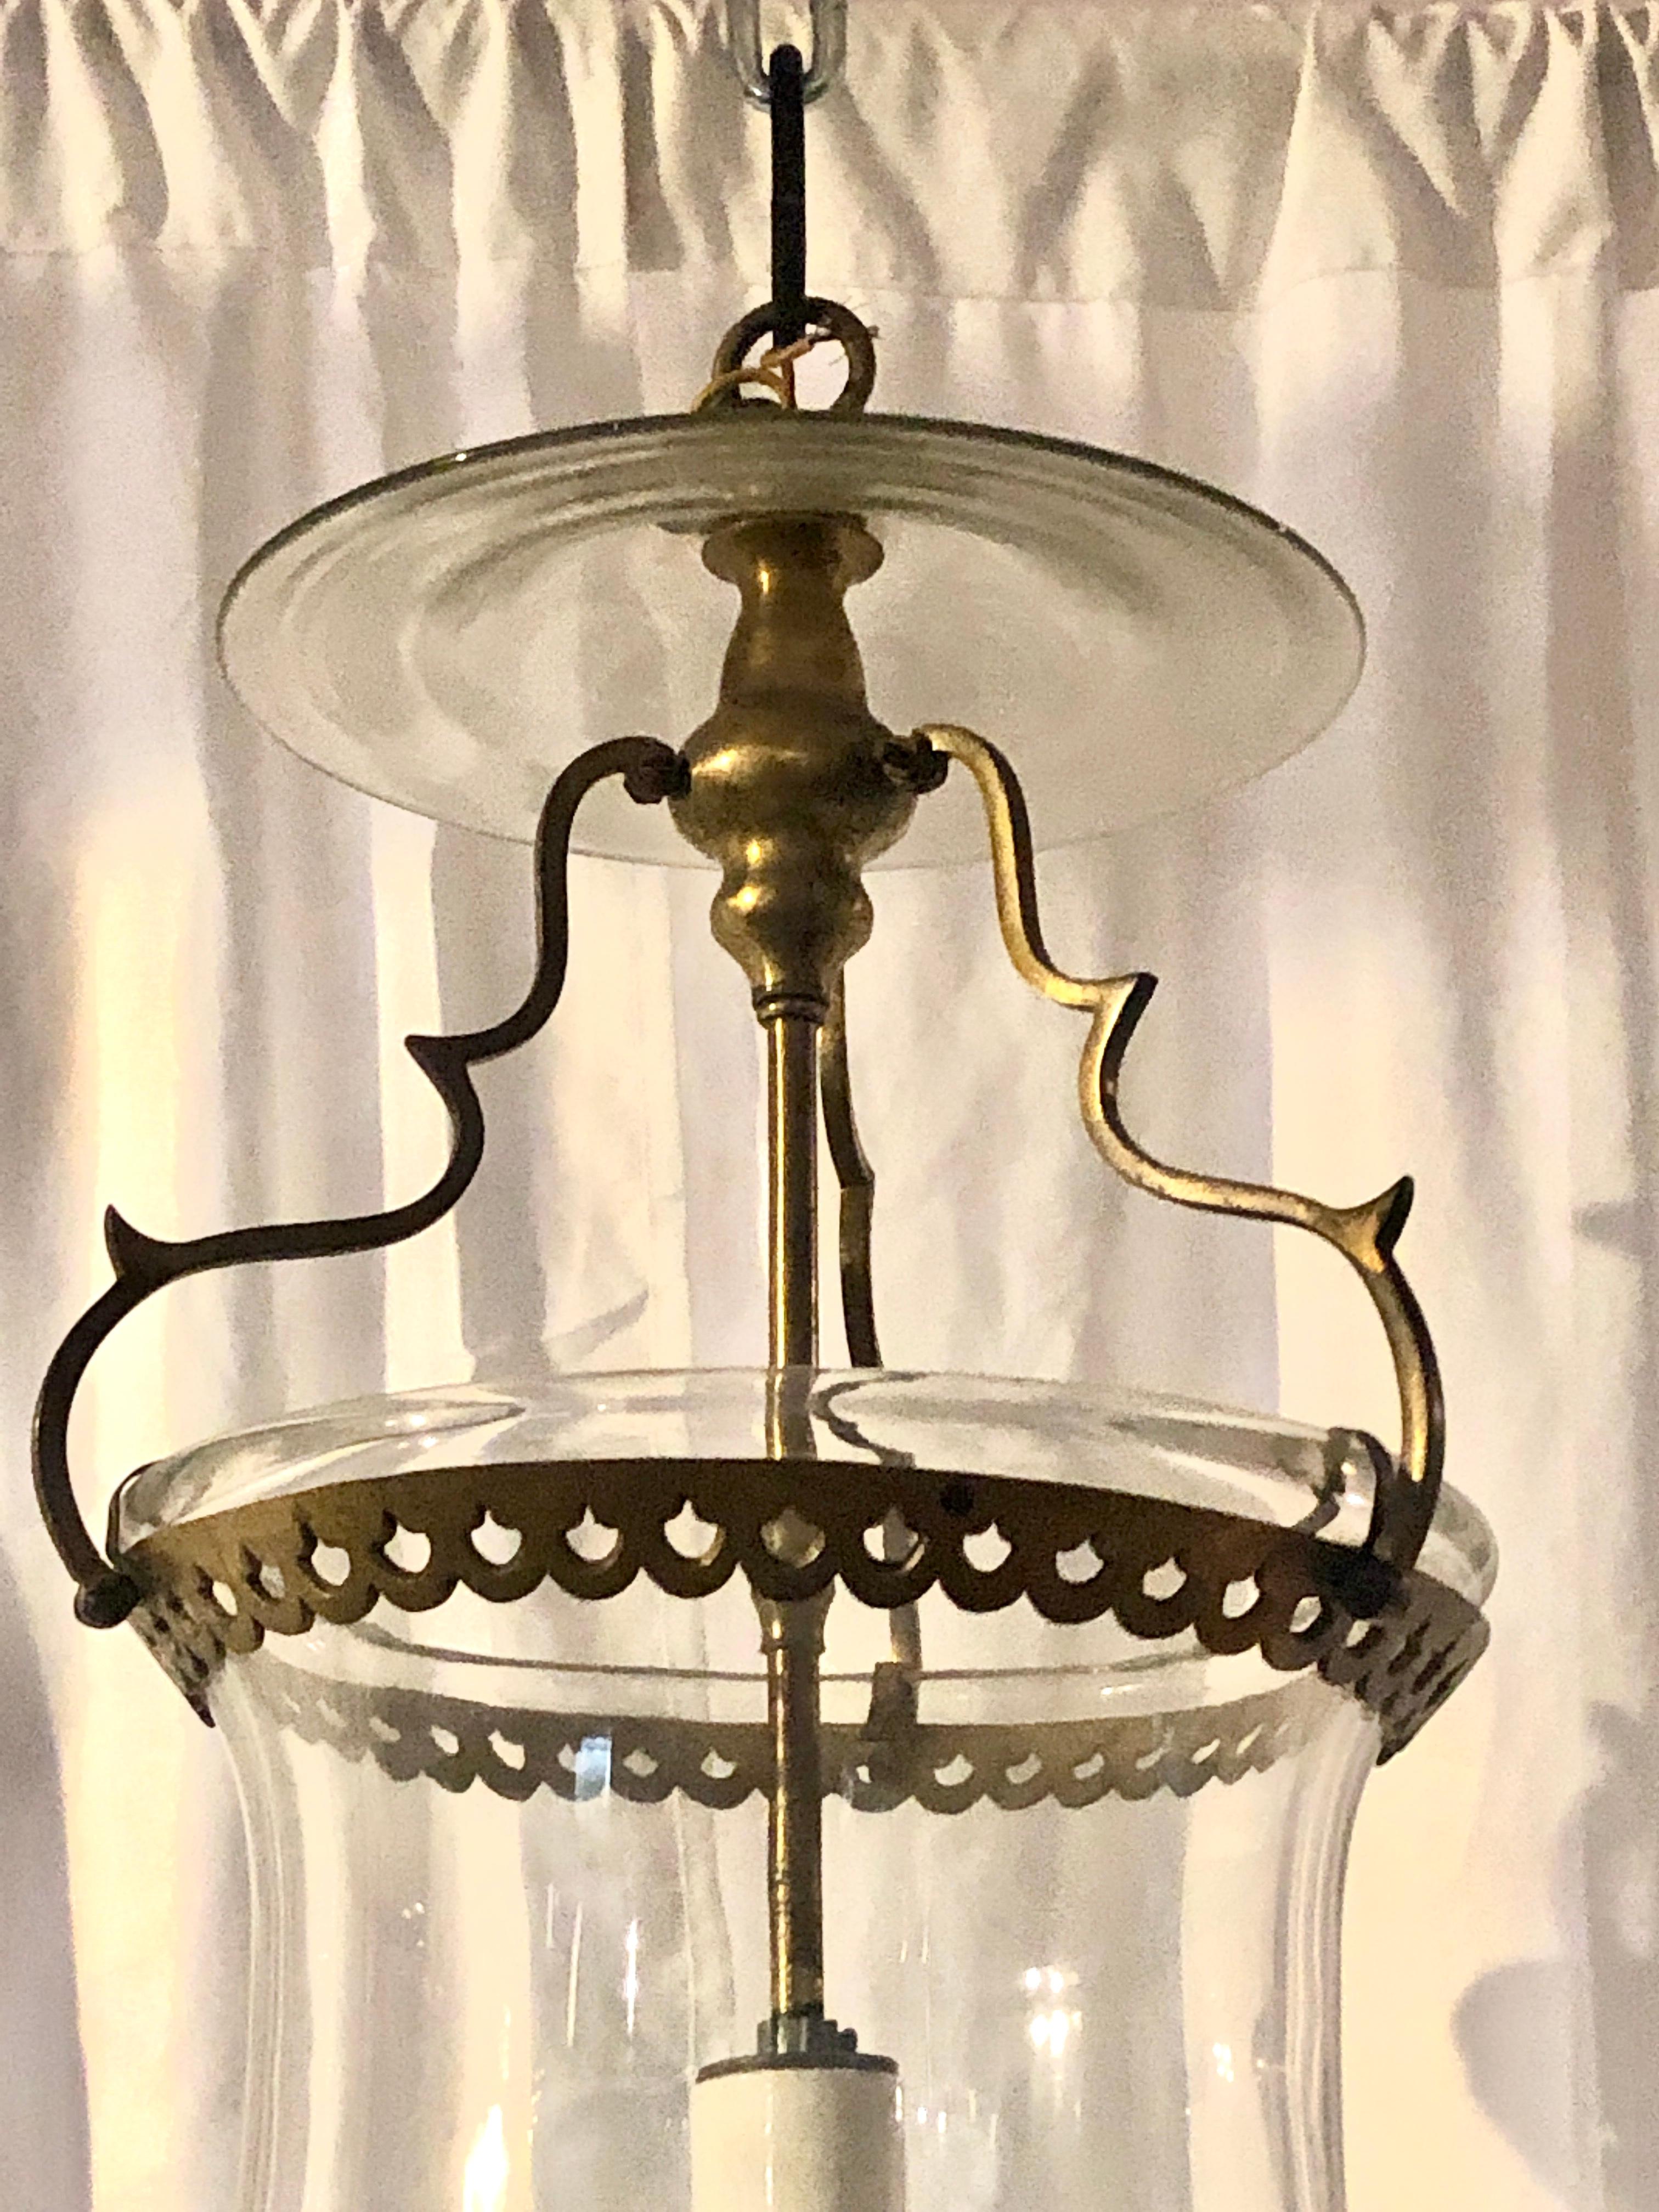 Antique brass and blown glass hall lantern, Circa 1920.
A very handsome fixture with nice lines and of smaller dimension. It would look perfect in a hallway or foyer entrance.